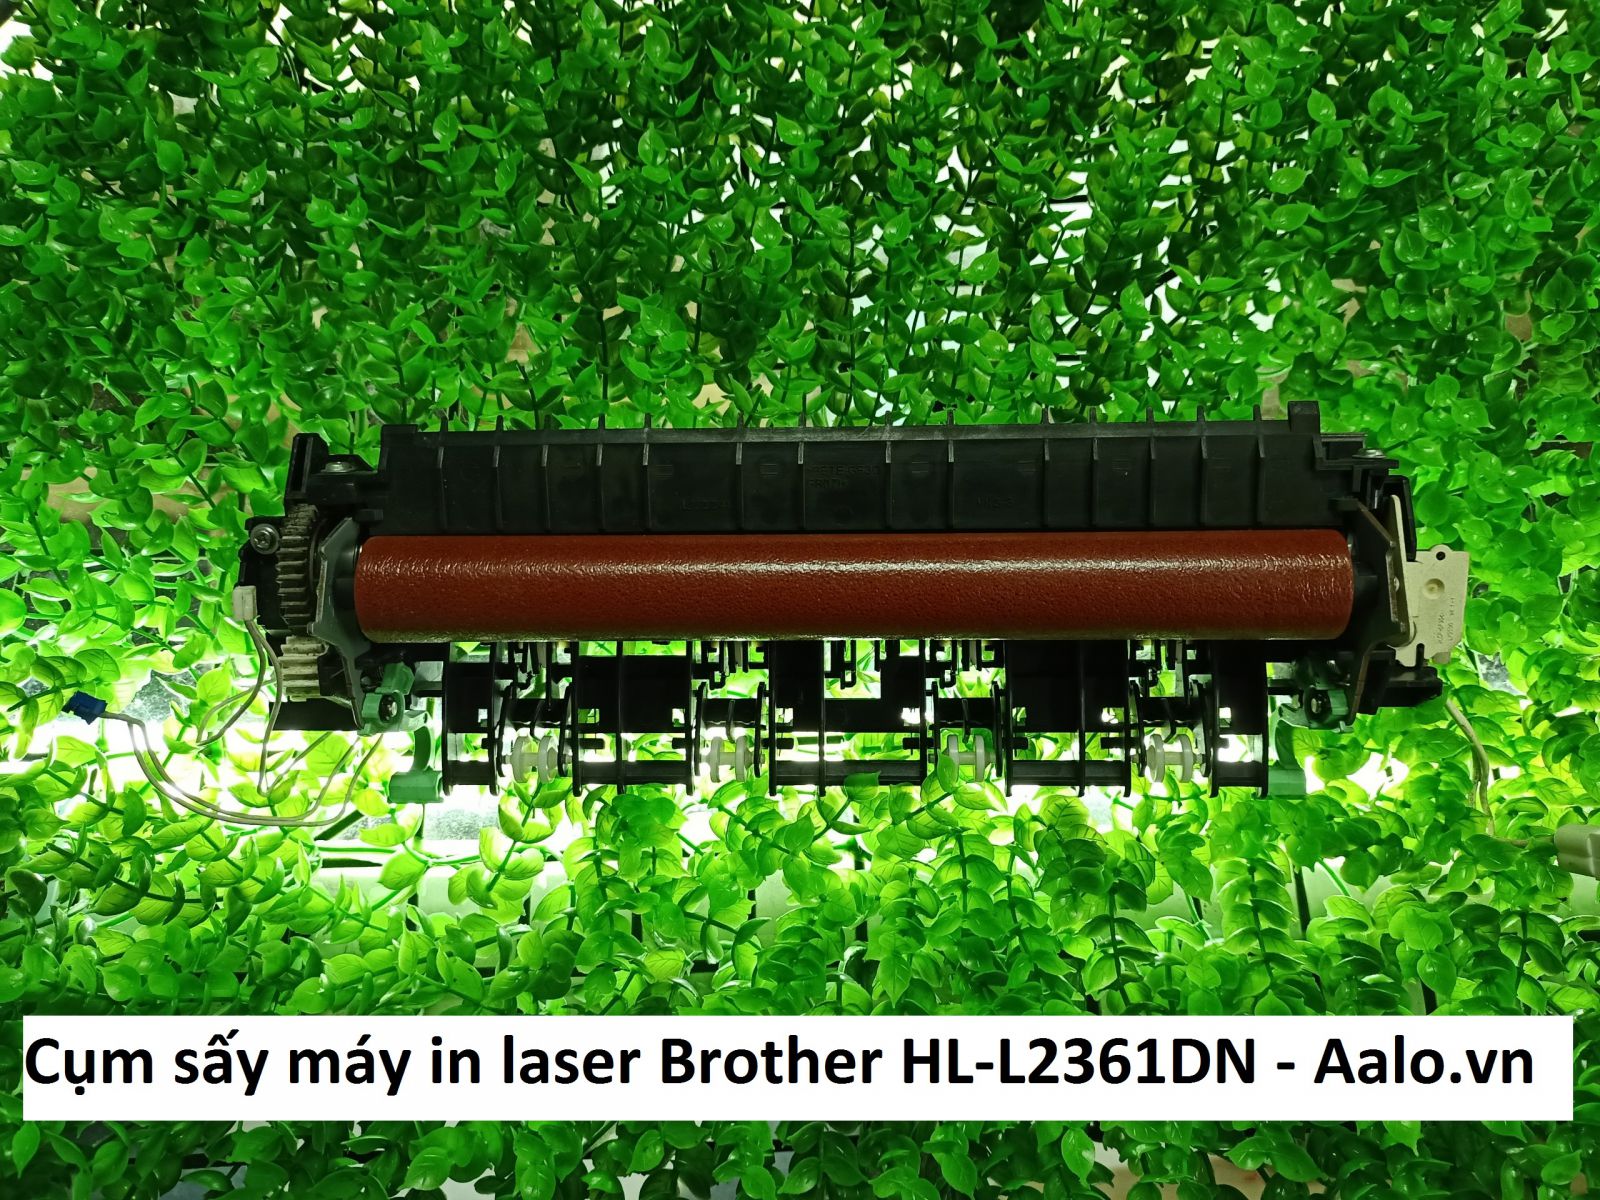 Cụm sấy máy in laser Brother HL-L2361DN - Aalo.vn